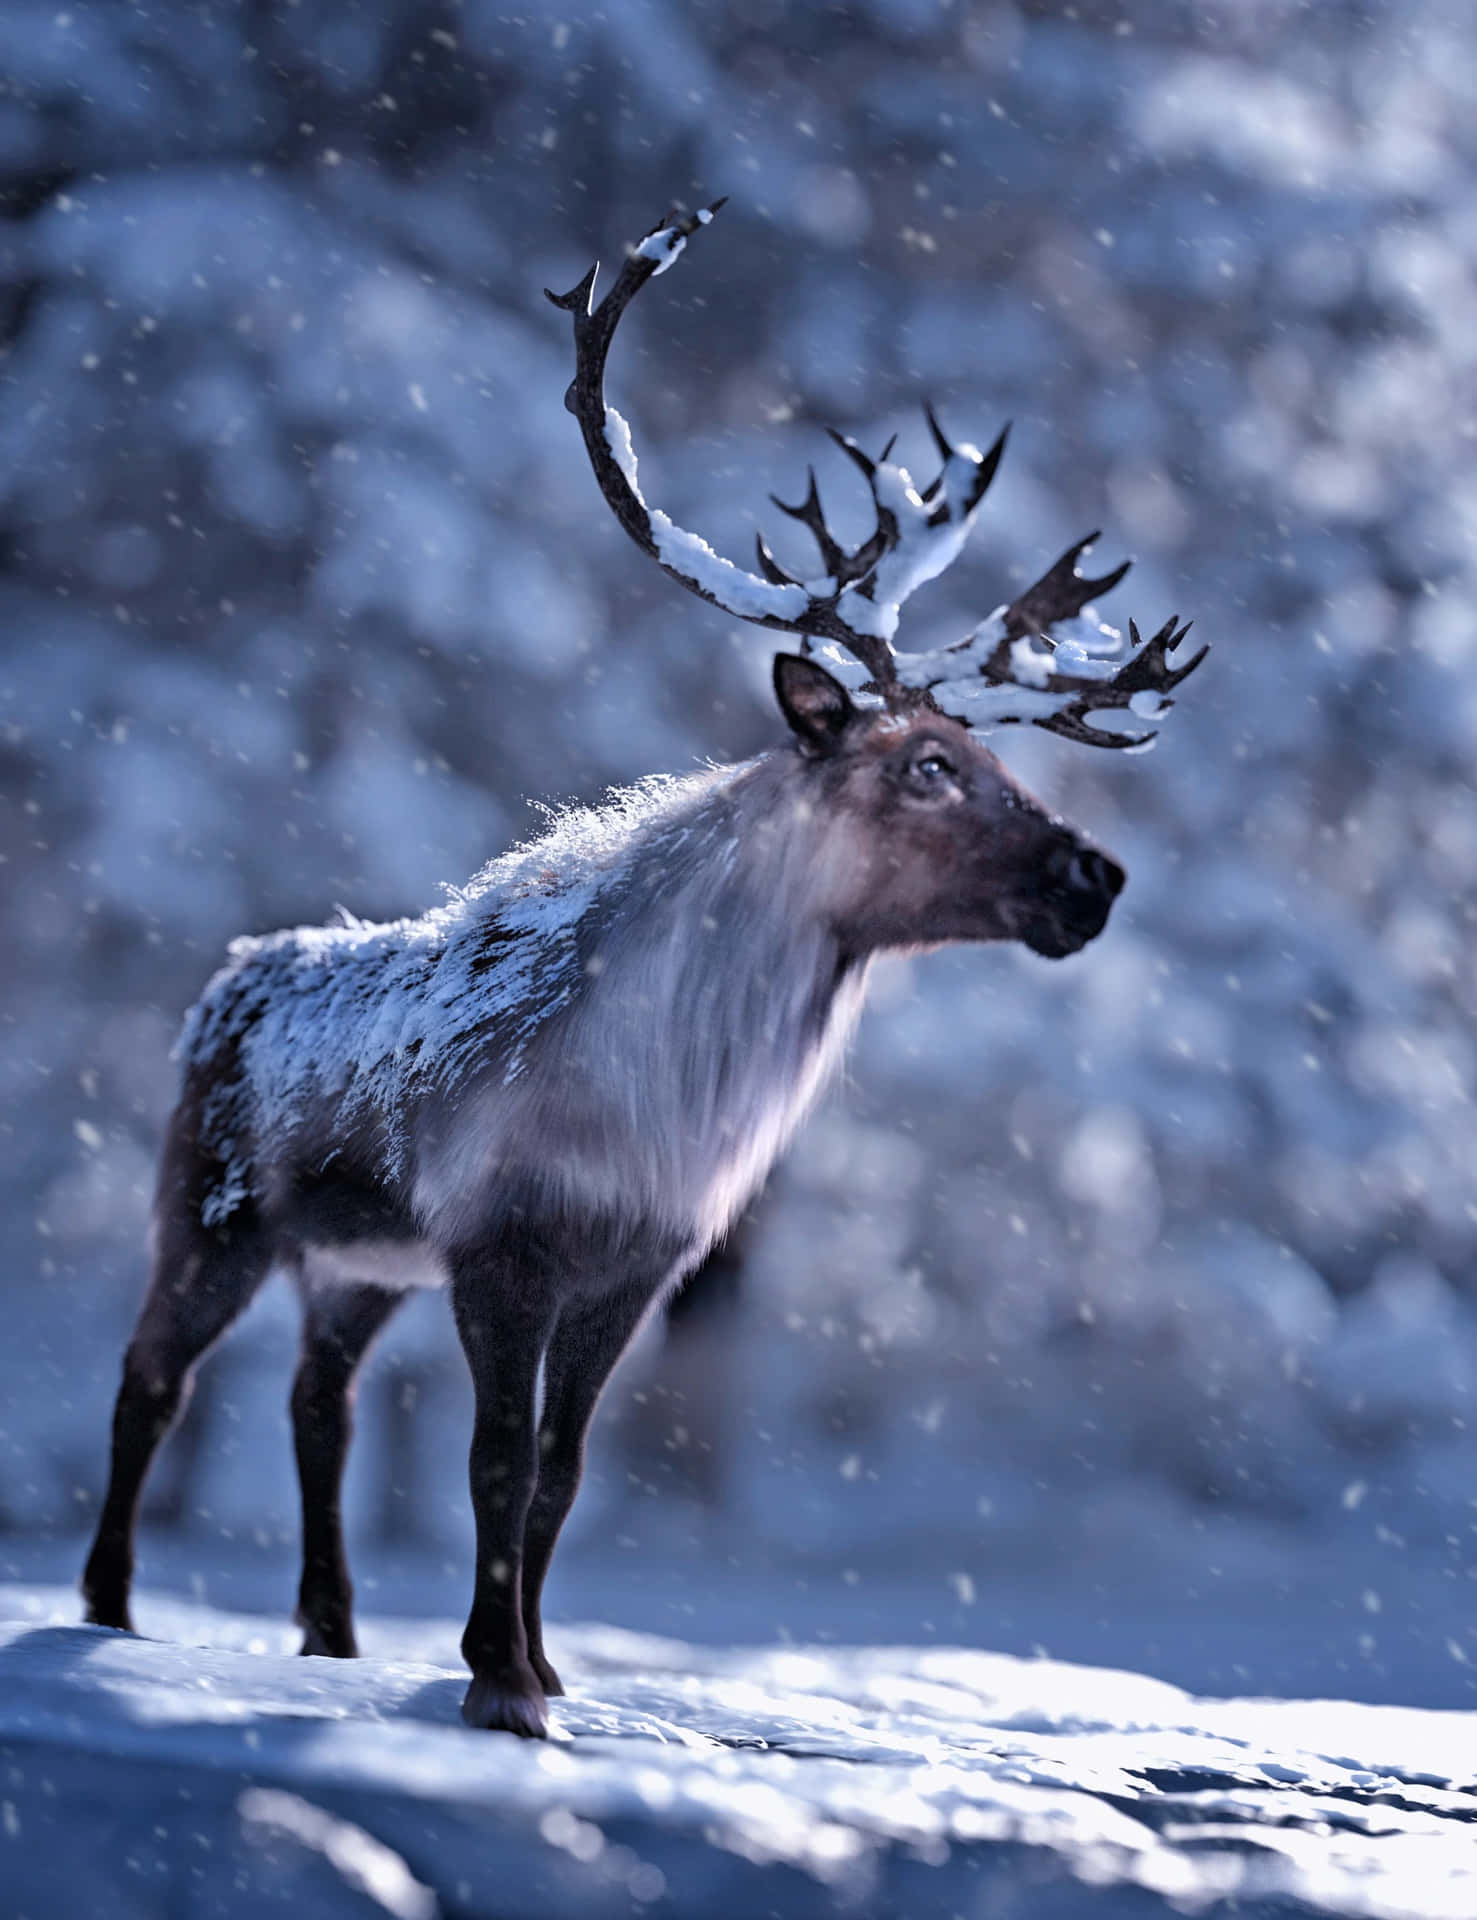 "A magical encounter with a reindeer in its natural habitat"